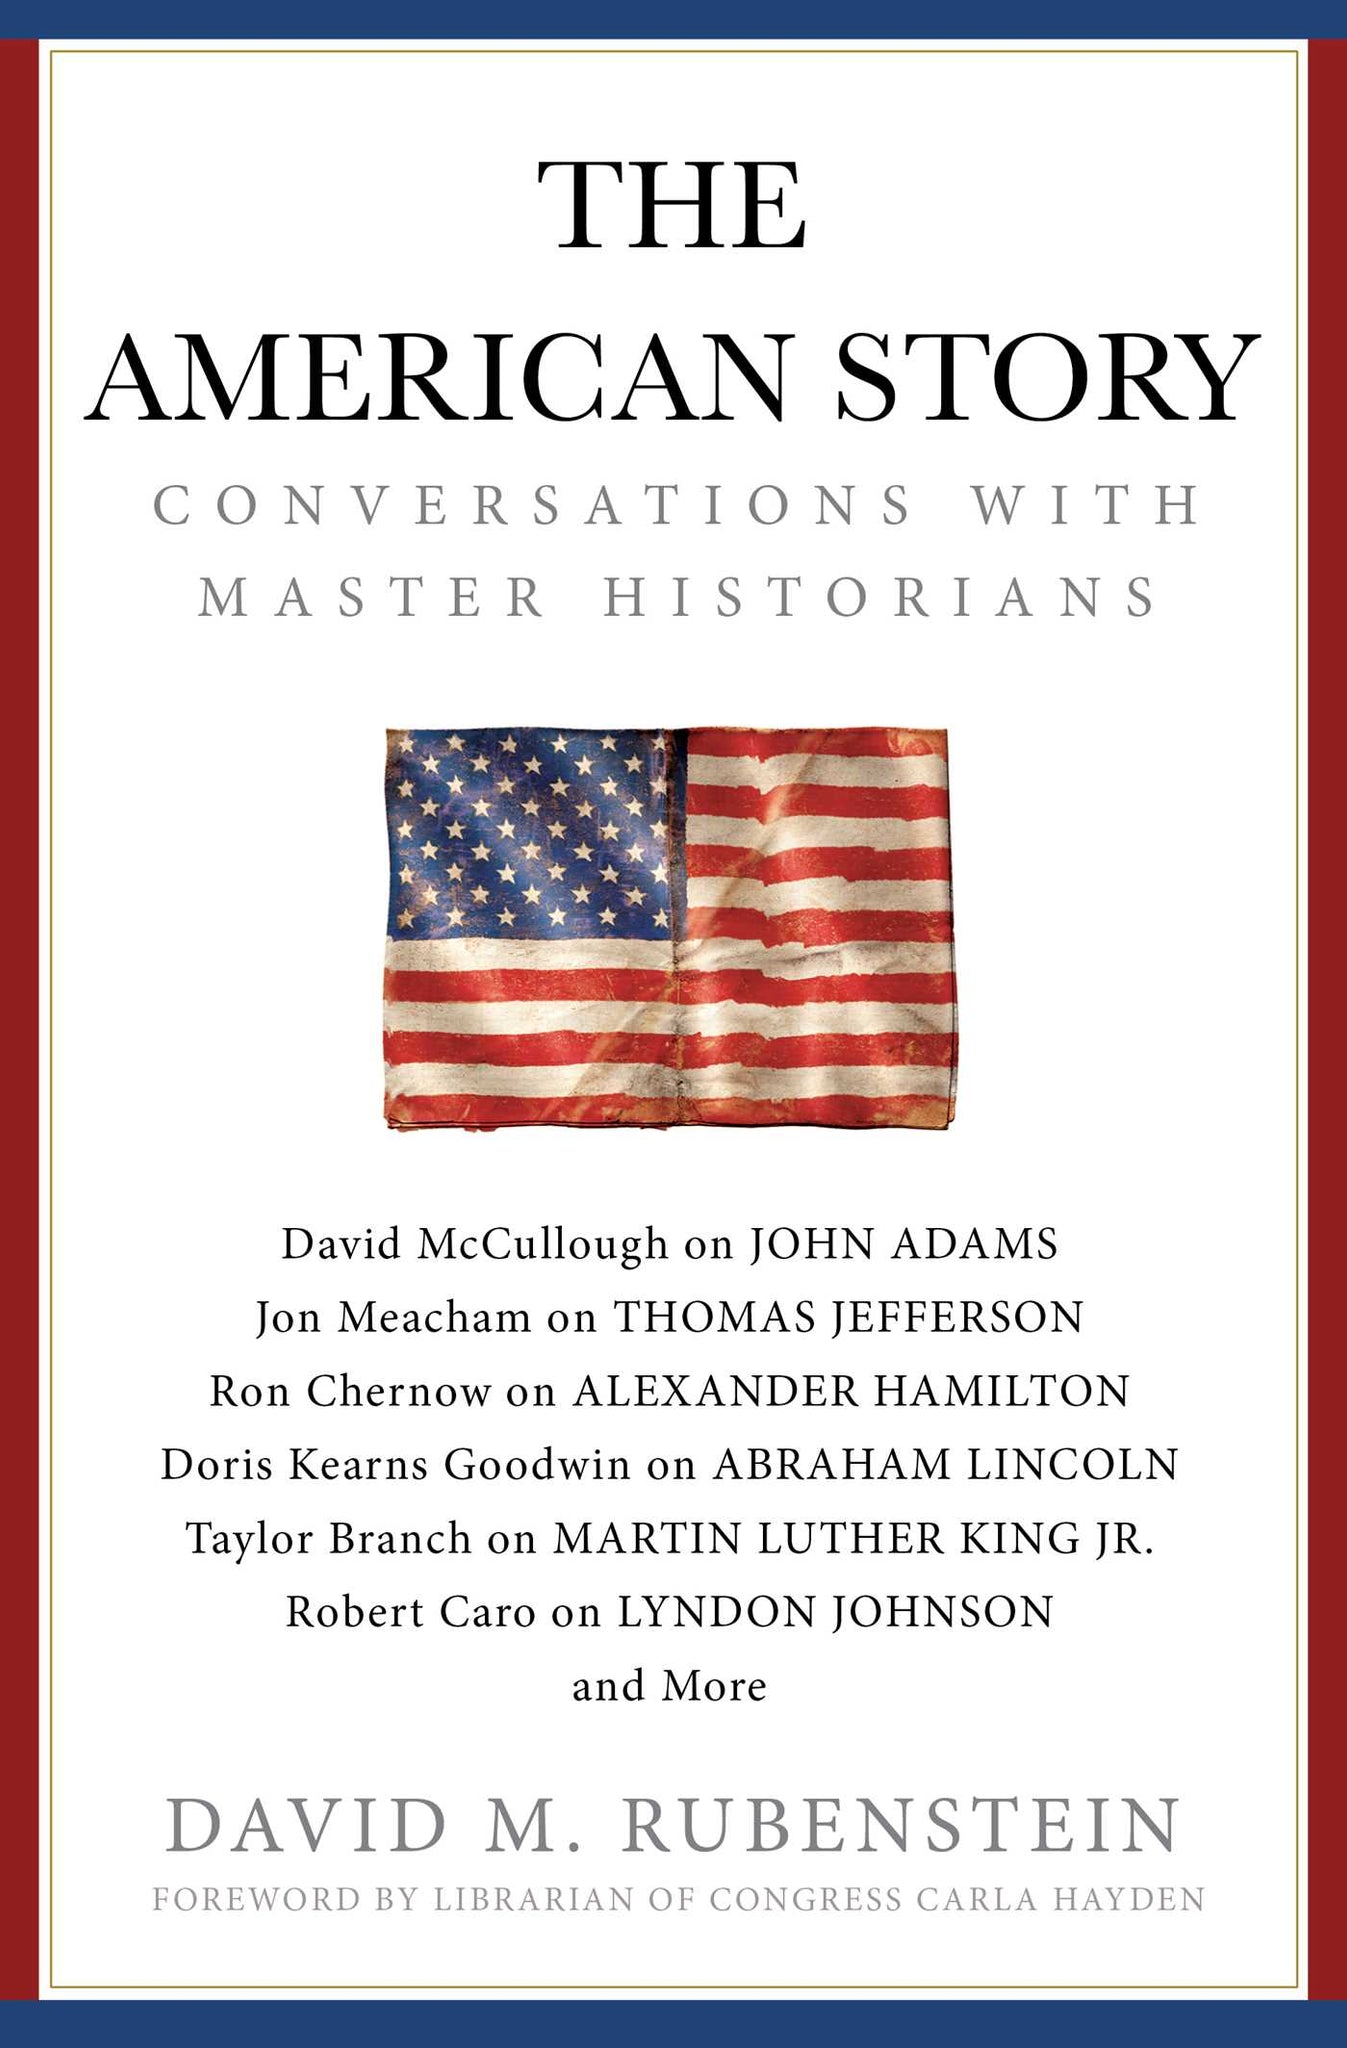 The American Story : Conversations with Master Historians